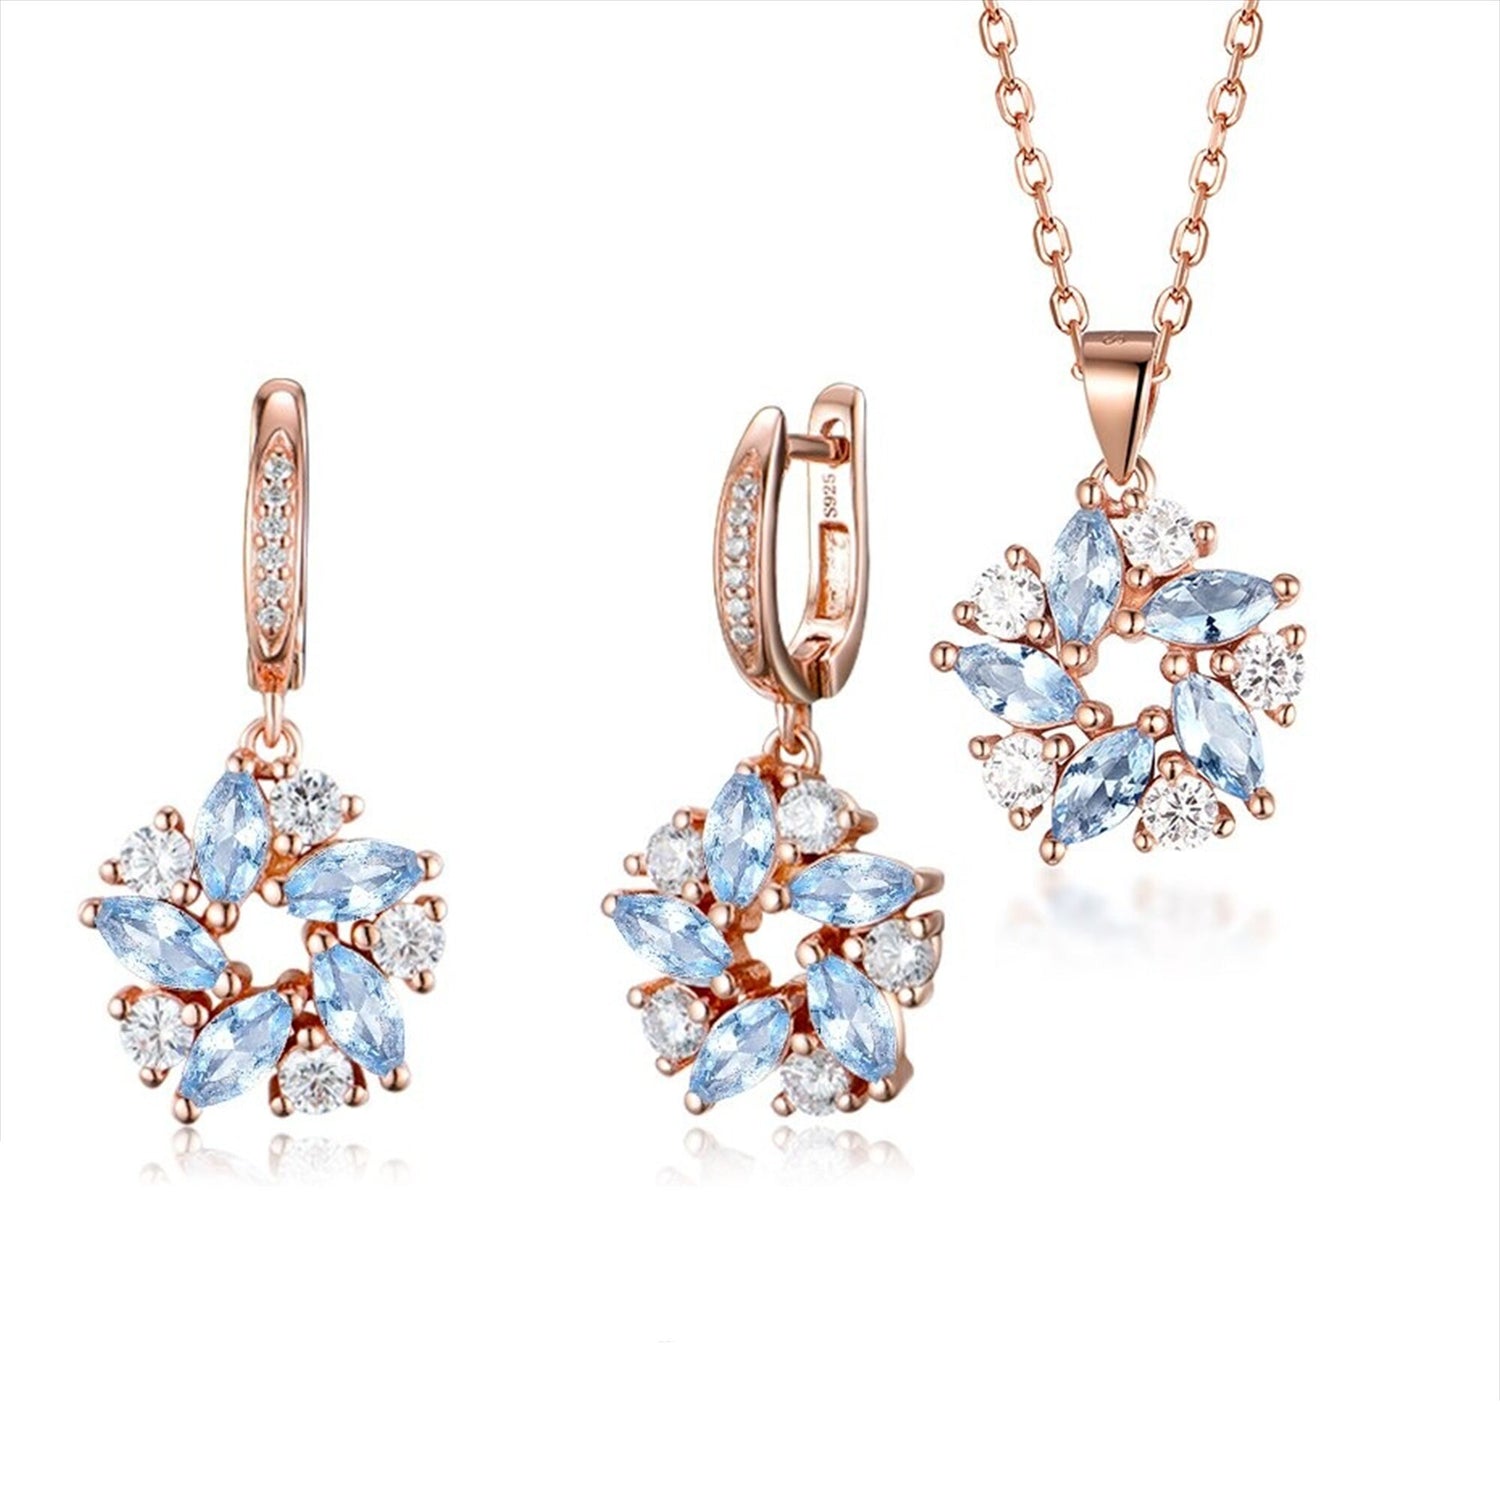 Marquise Topaz 925 Sterling Silver Jewelry Set, Marquise Topaz Gemstone Pendant Necklace and Earrings